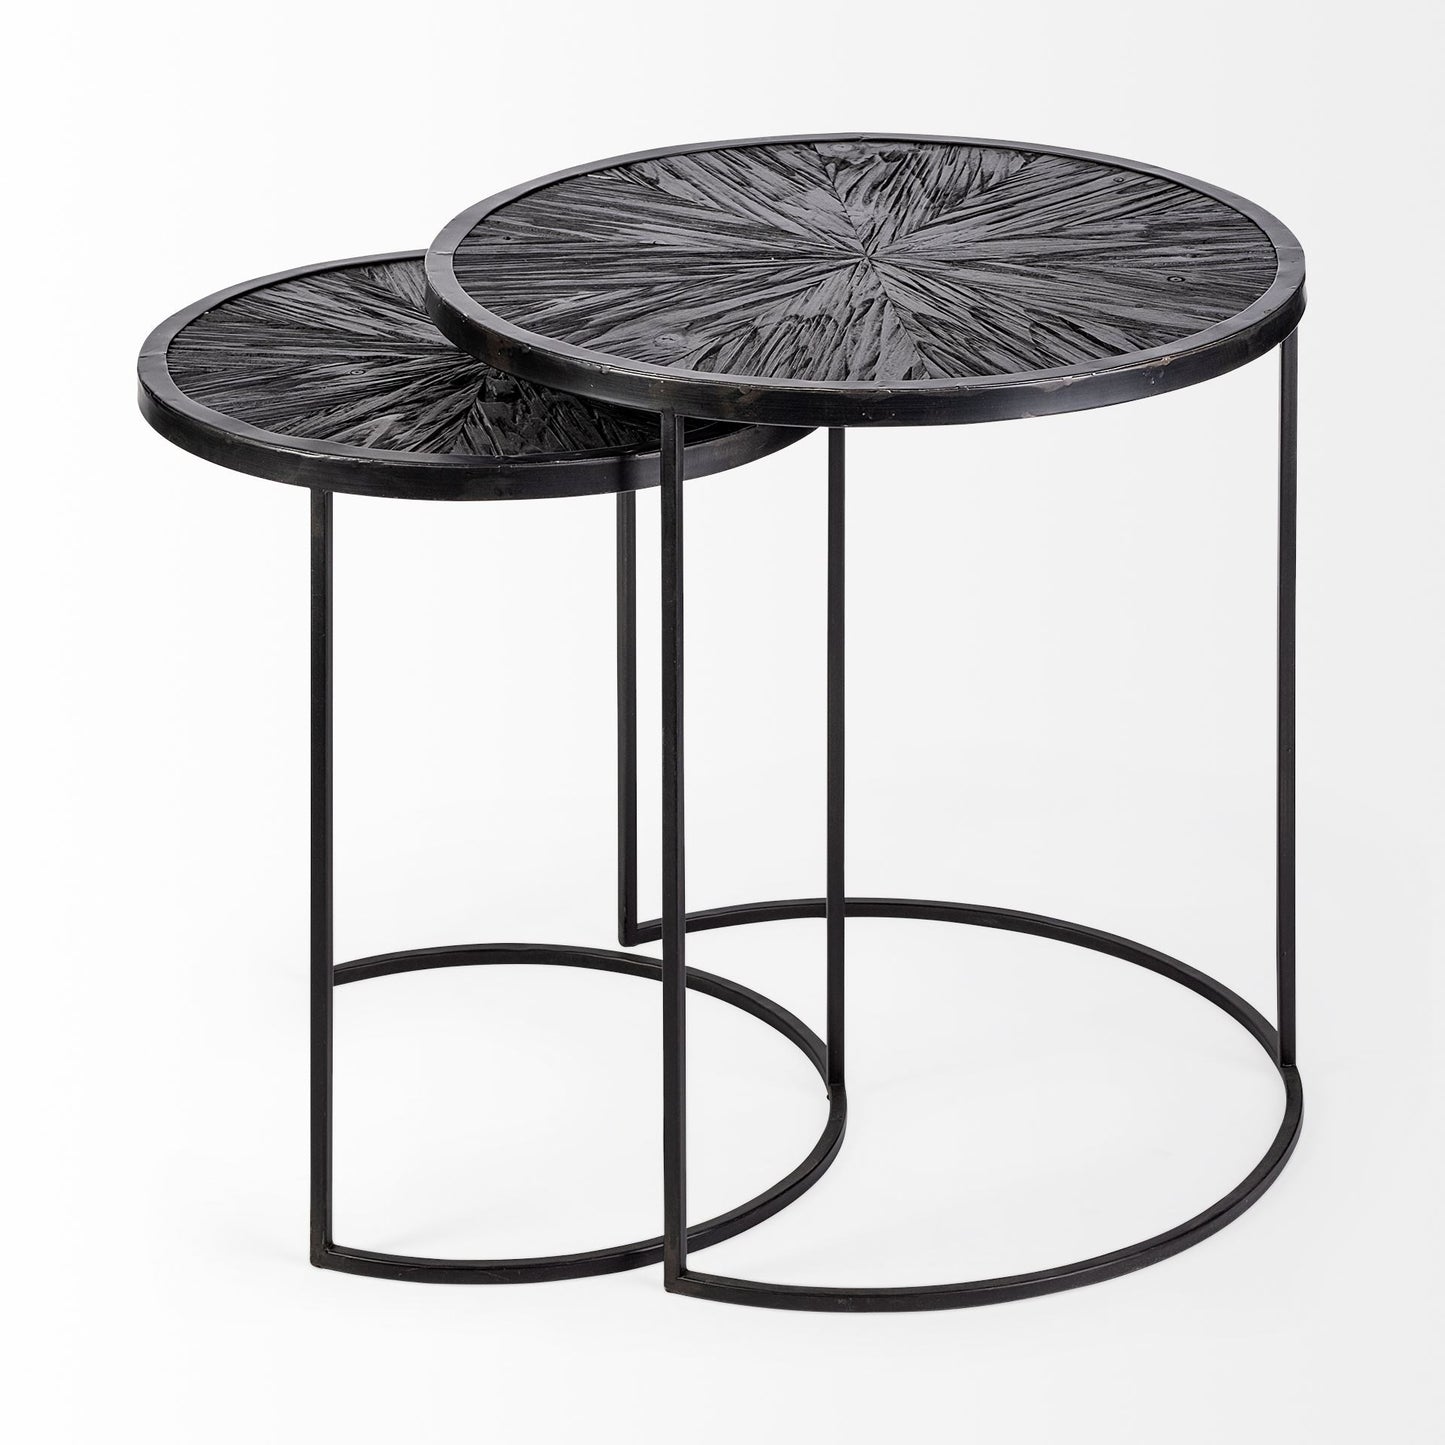 Set of 2 Dark Wood Round Top Accent Tables with Black Iron Frame By Homeroots